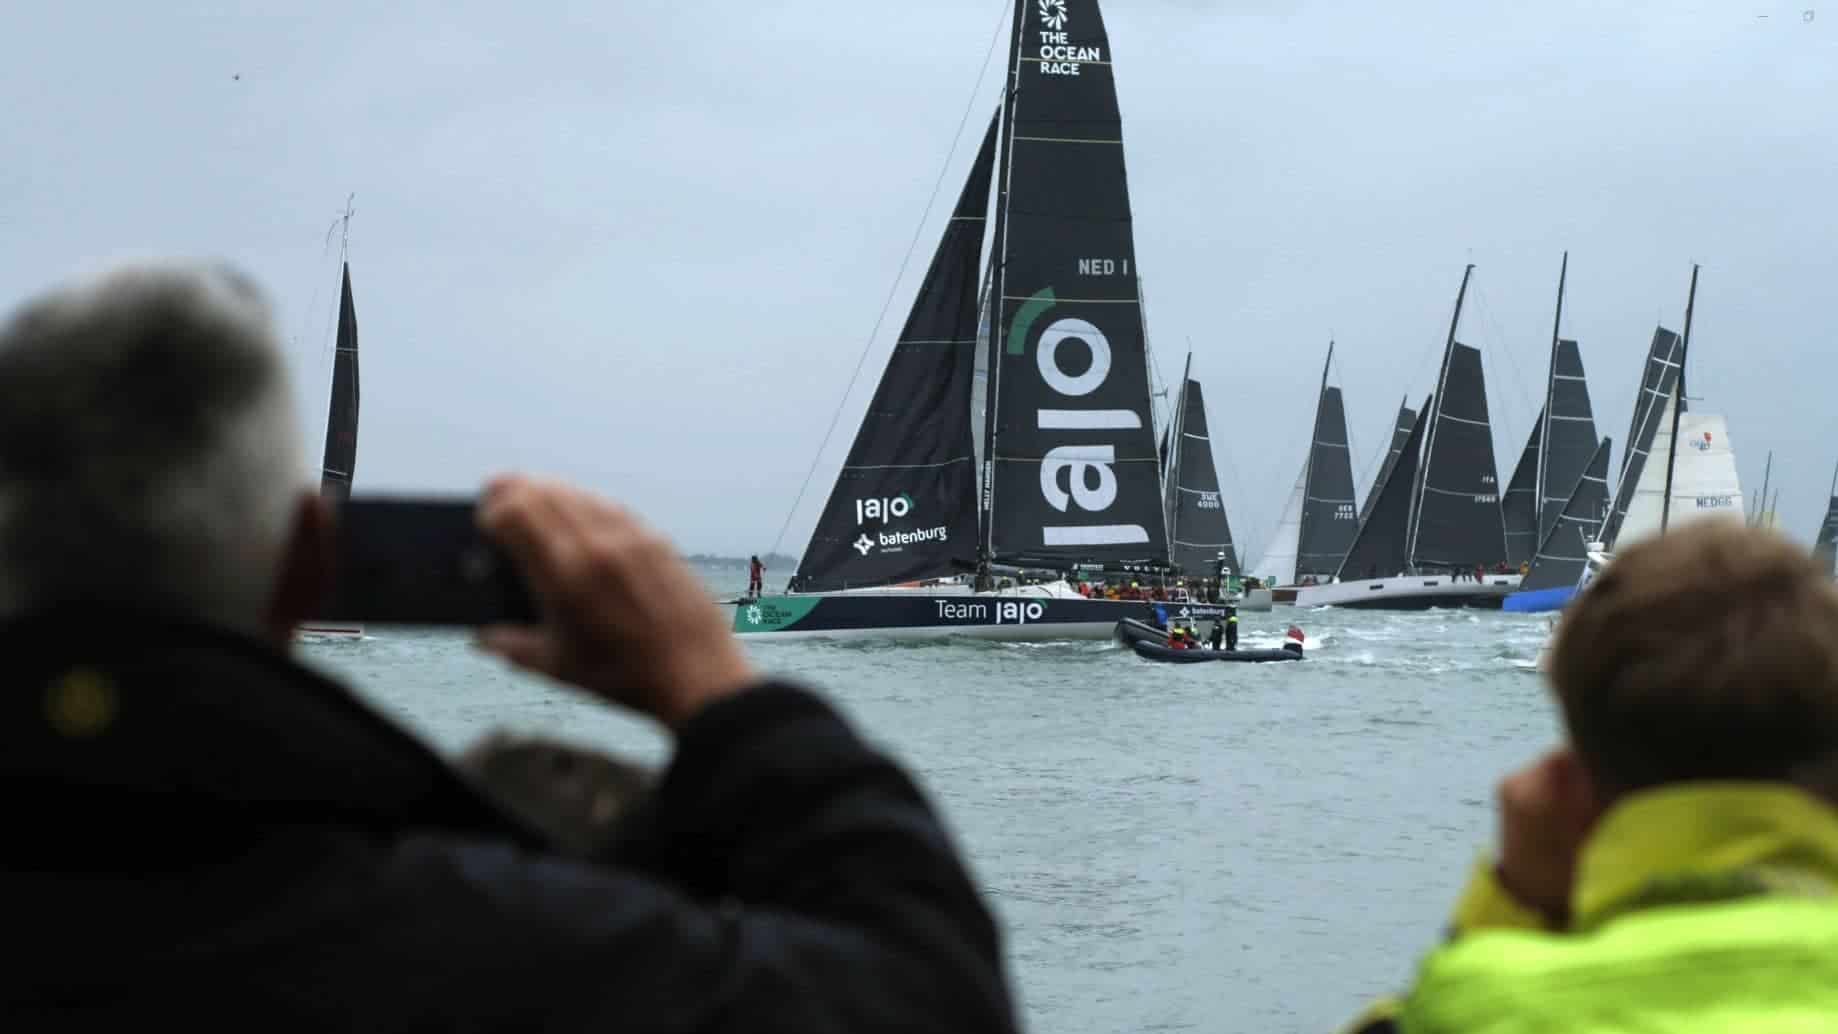 Spectators in Cowes for the Rolex Fastnet Race